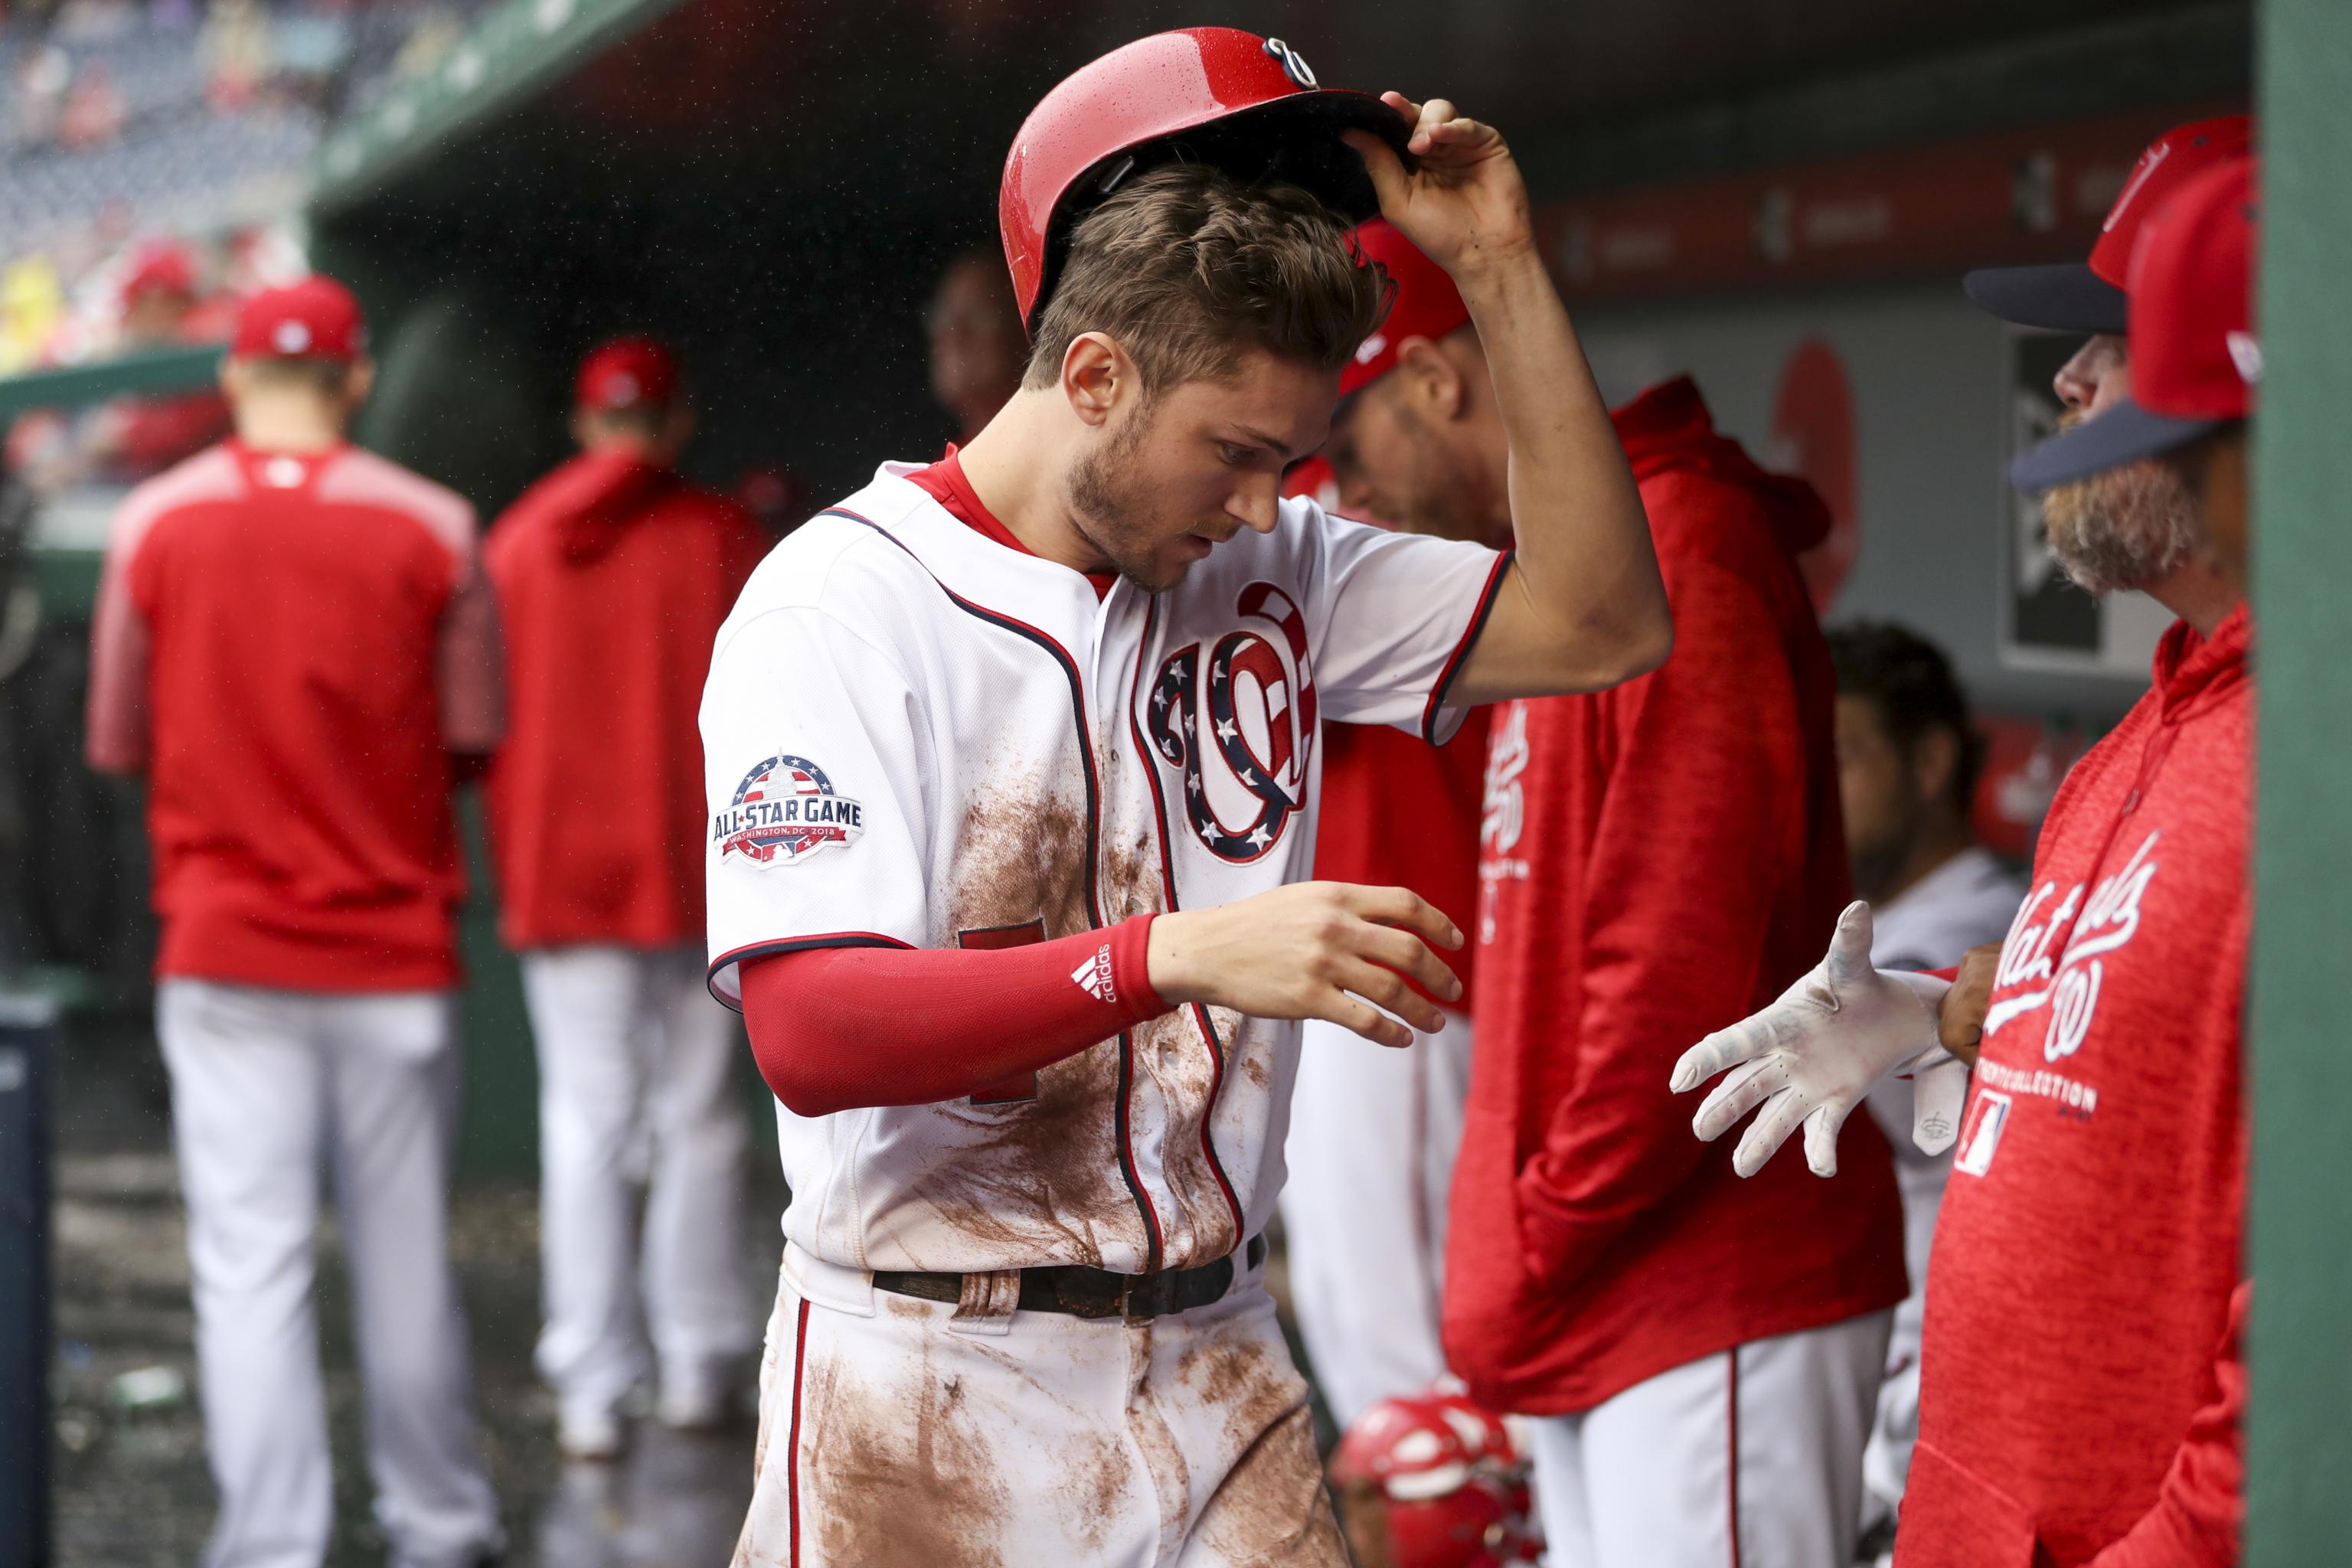 Trea Turner makes his Phillies debut in the leadoff spot to great